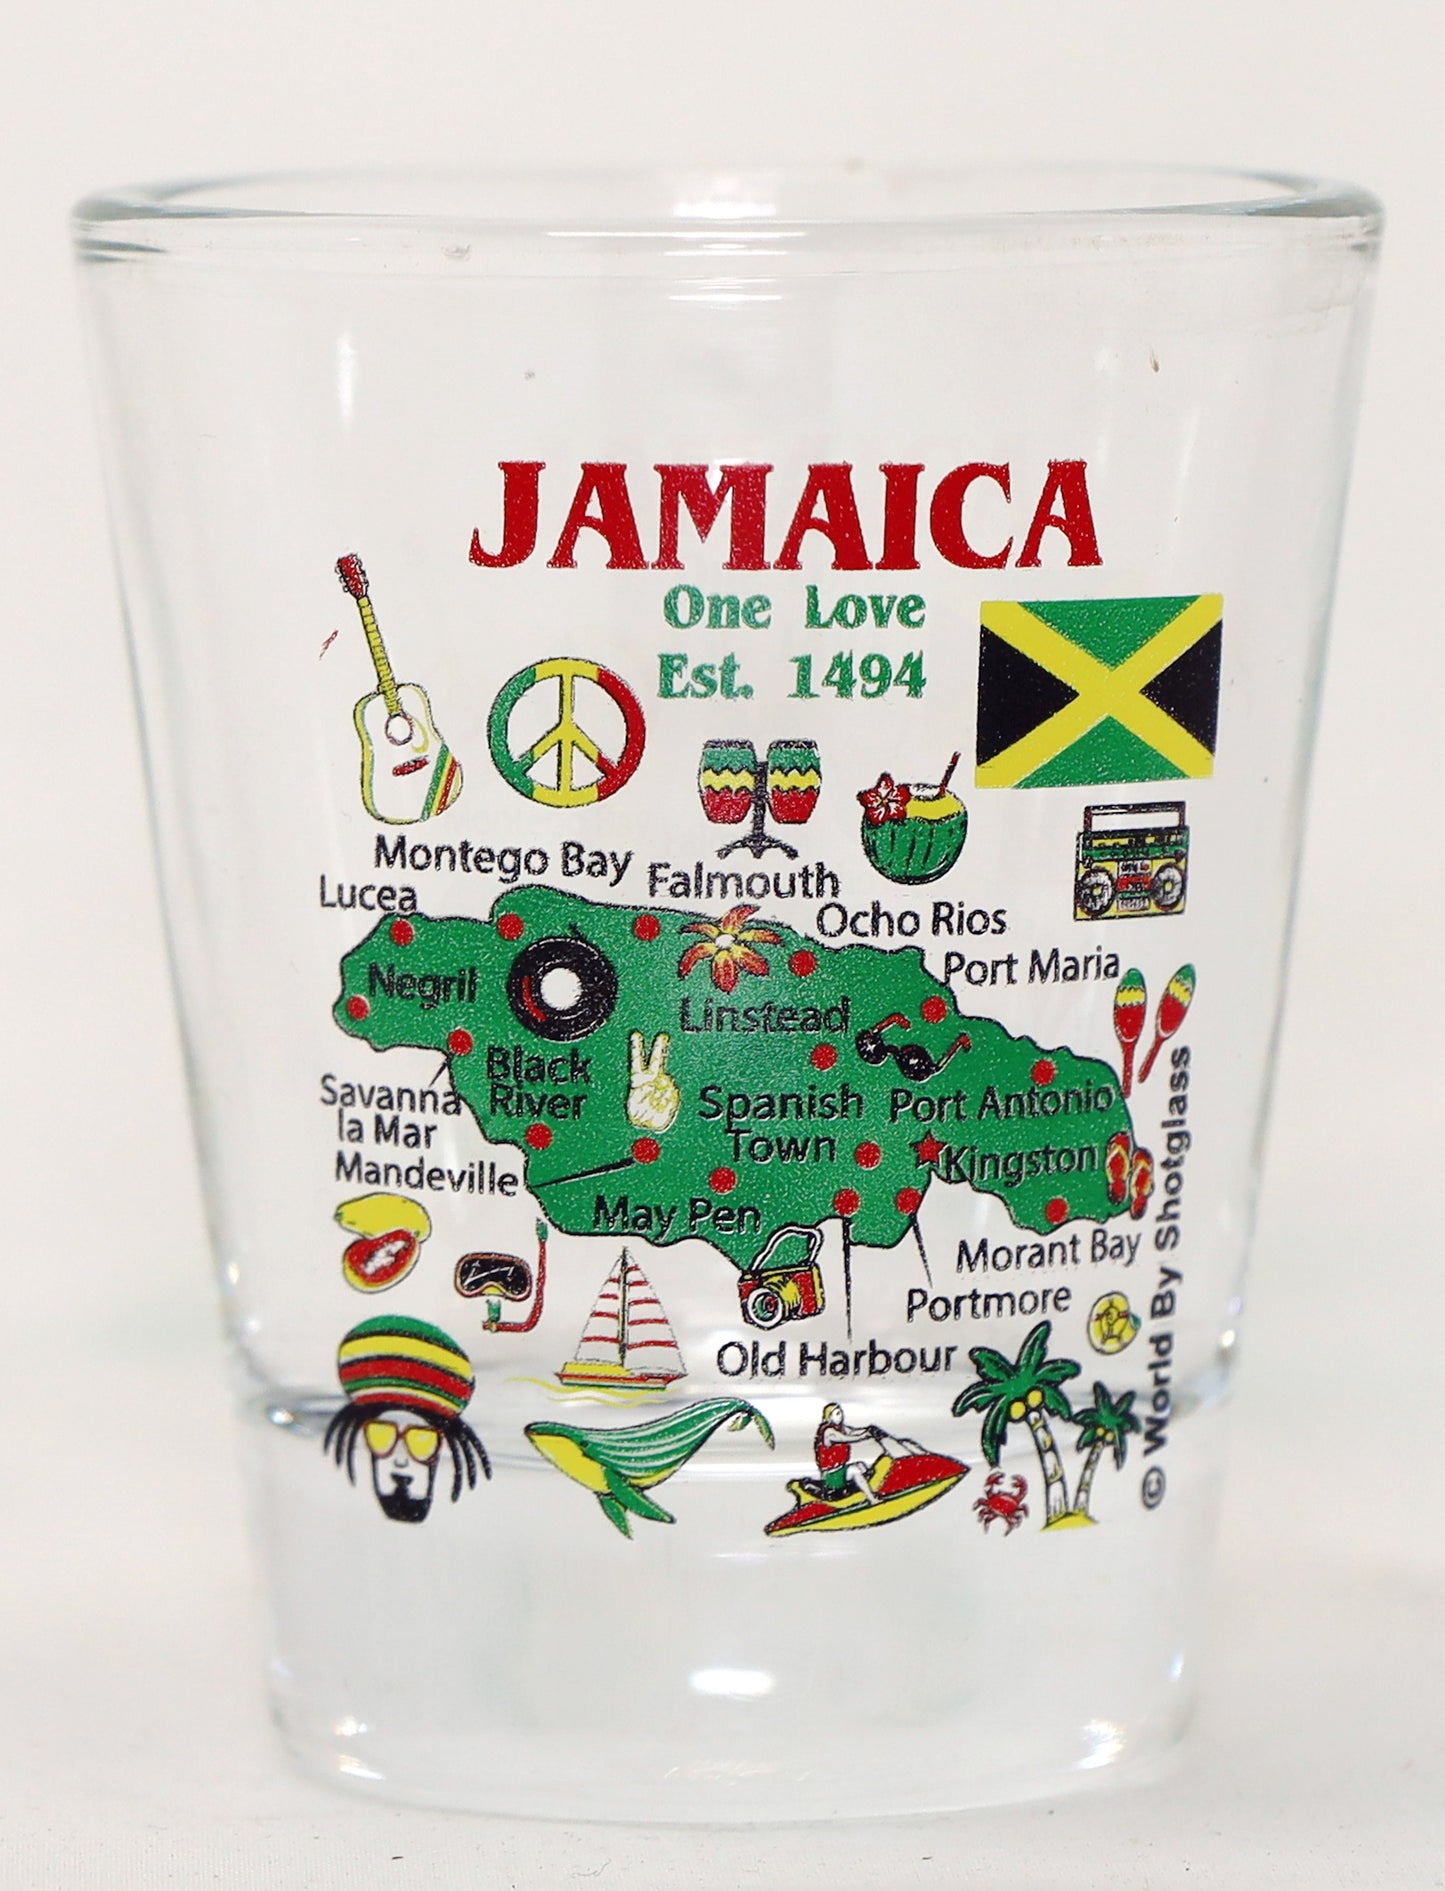 Jamaica Jumping Dolphins Boxed Shot Glass Set (Set of 2)